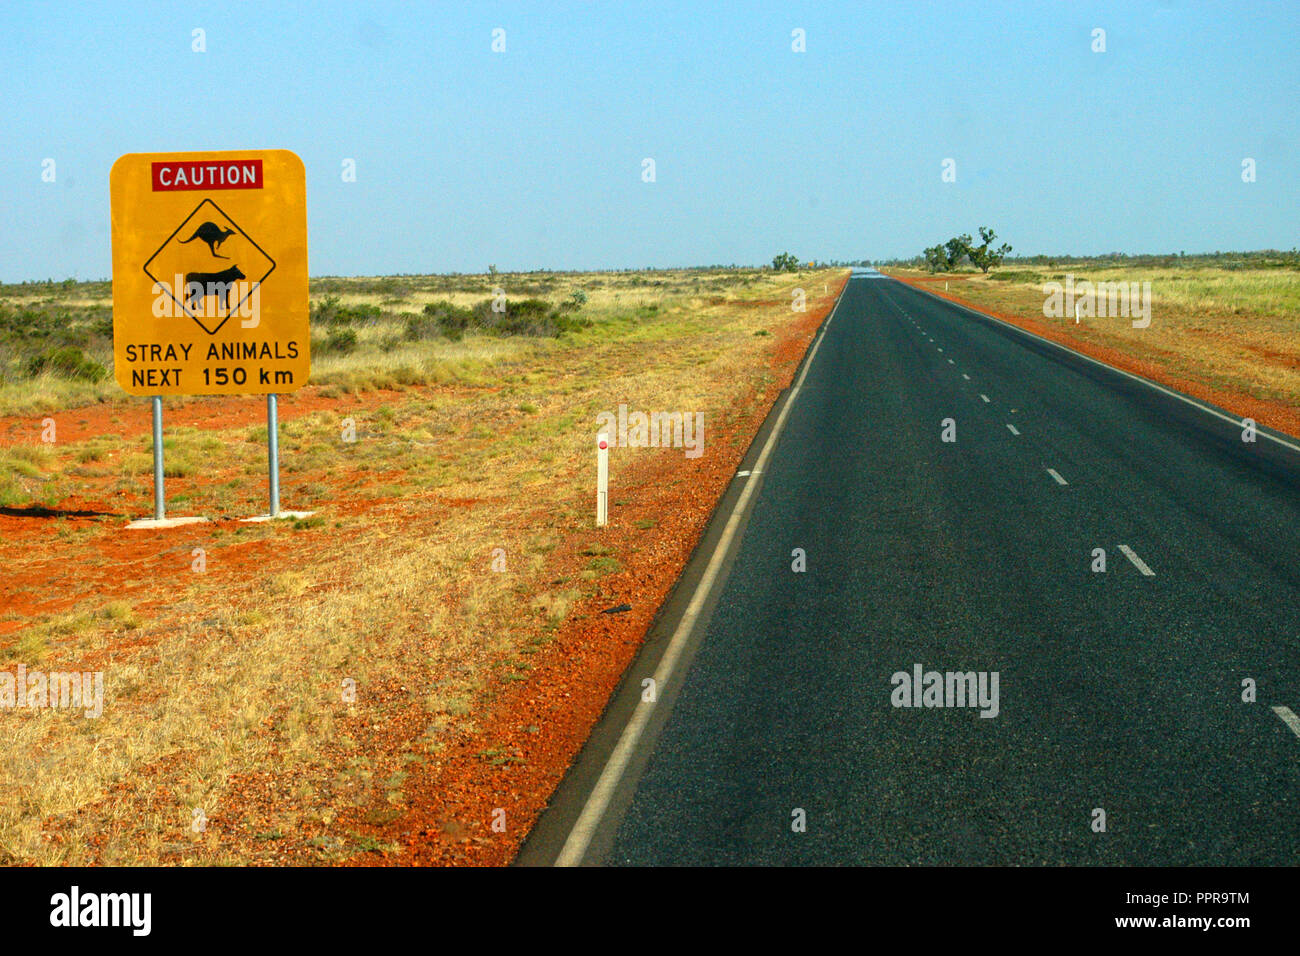 Caution stray animals for next 150 km, road sign on an outback road, Western Australia. Stock Photo